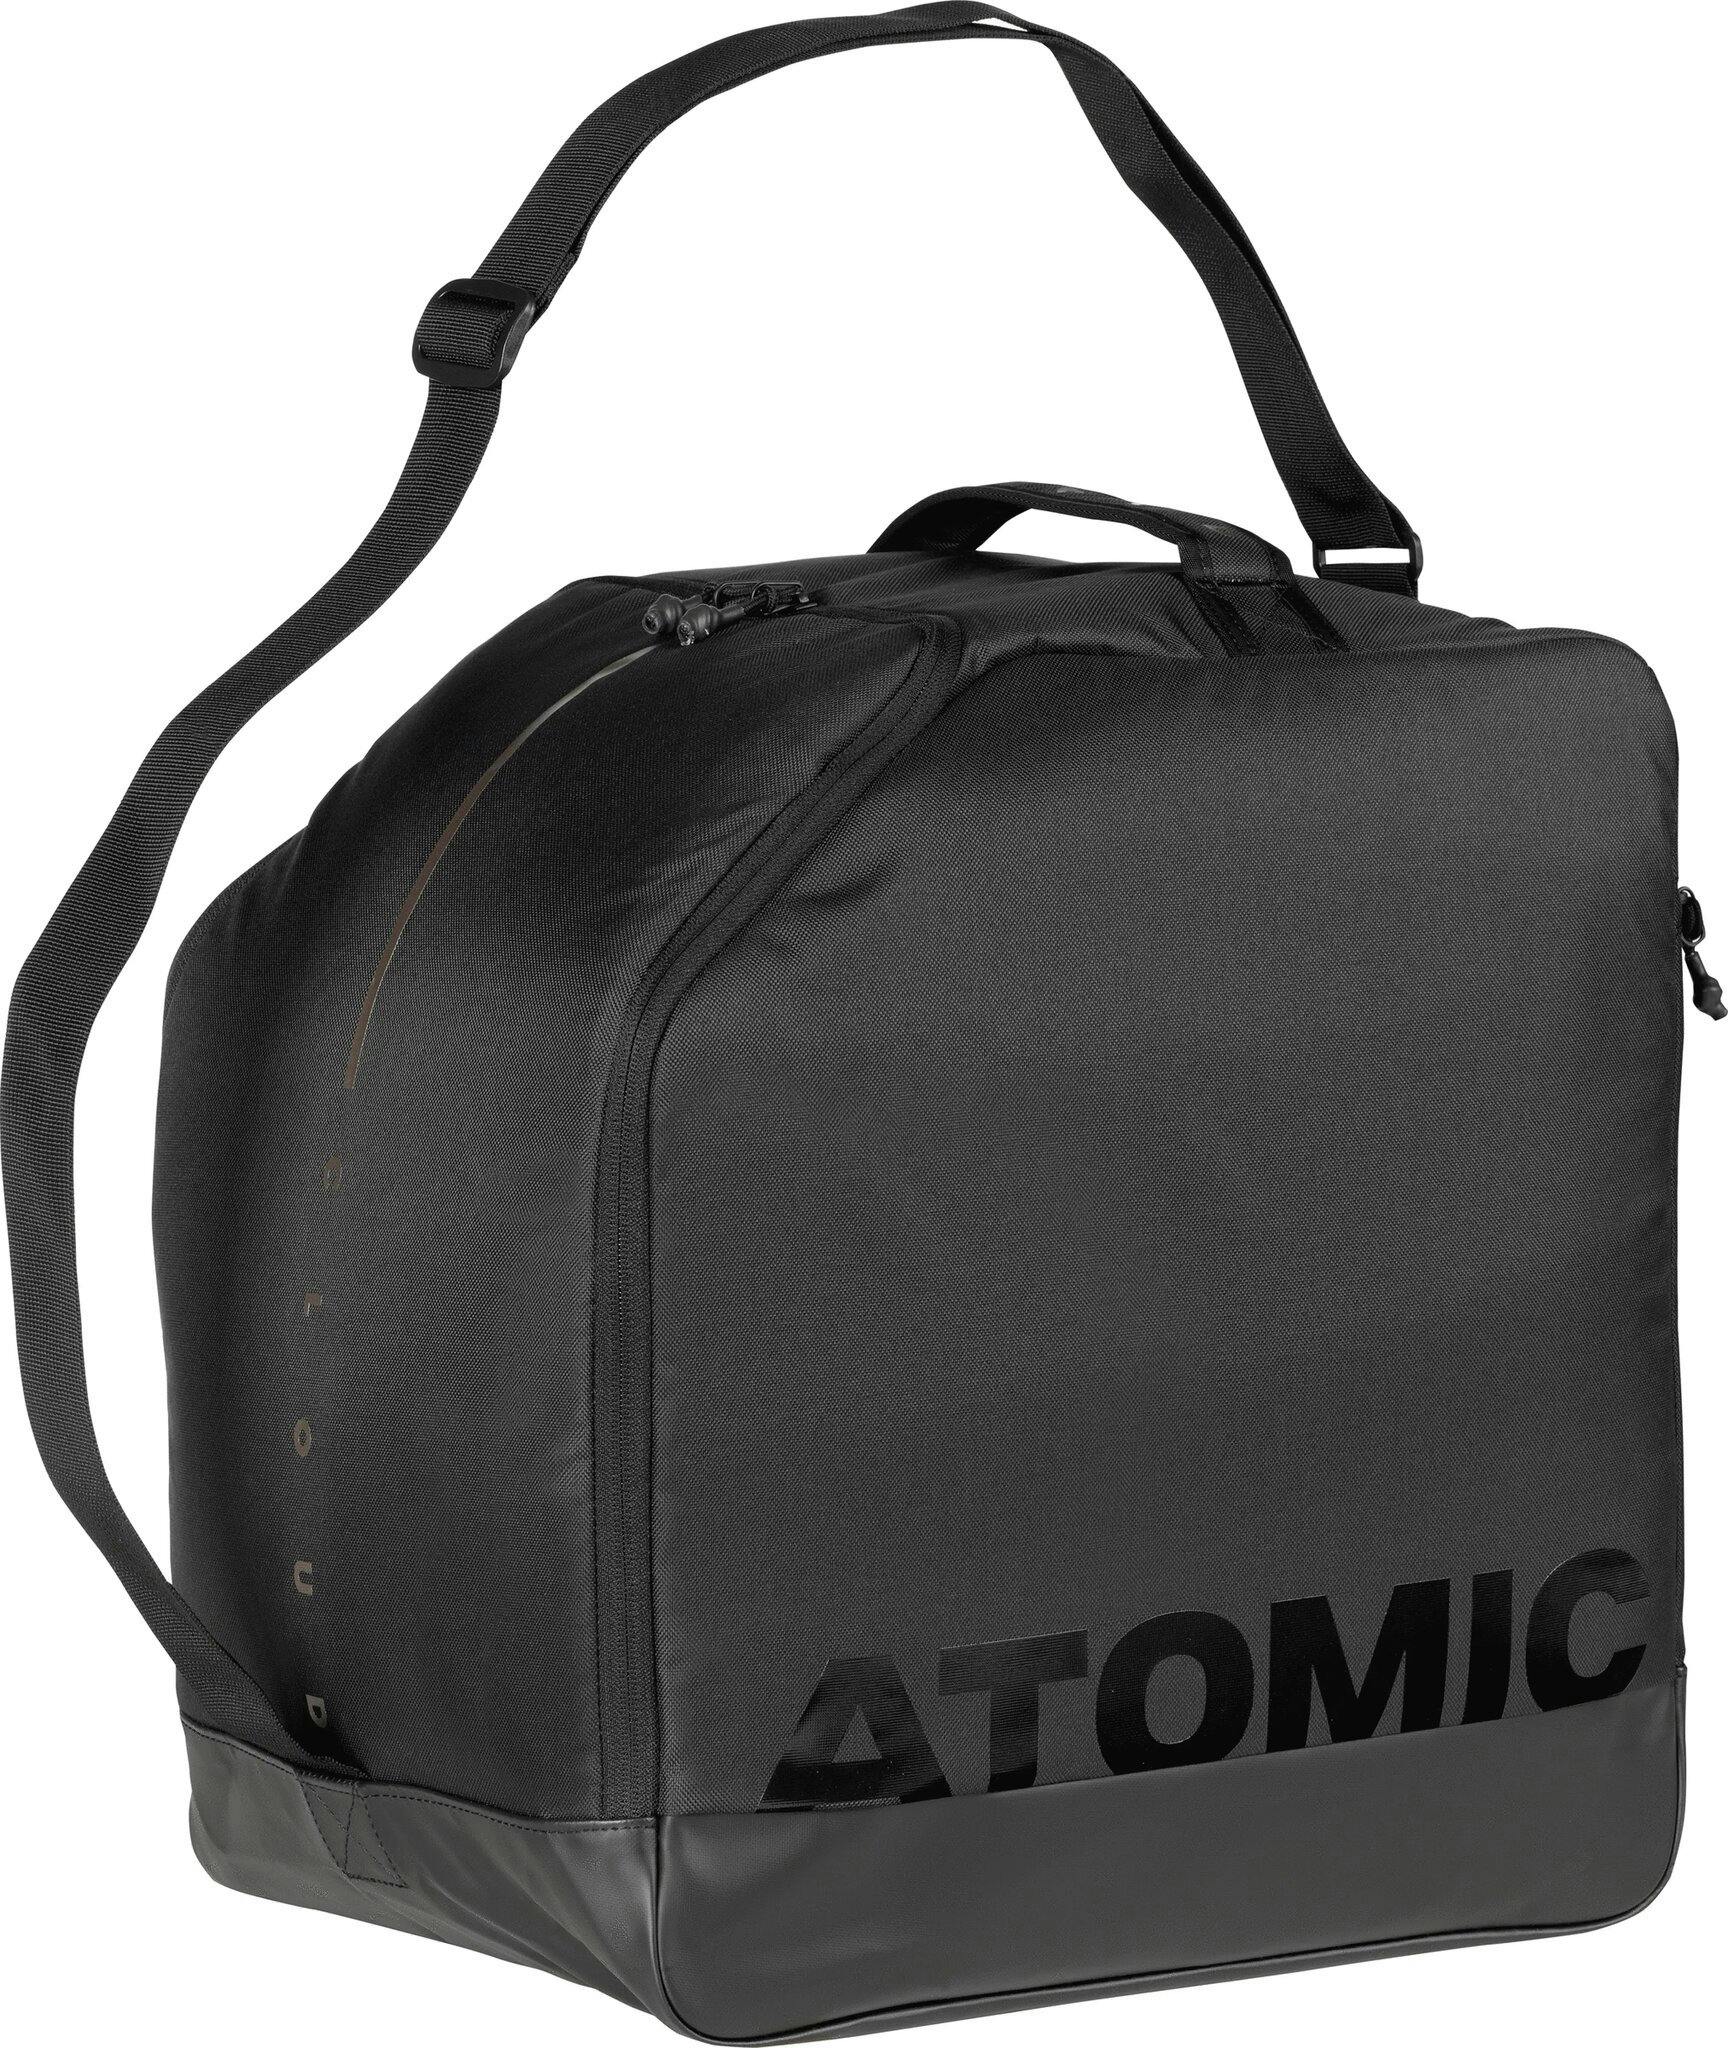 Product image for Boots and Helmet Bag Cloud - Women's